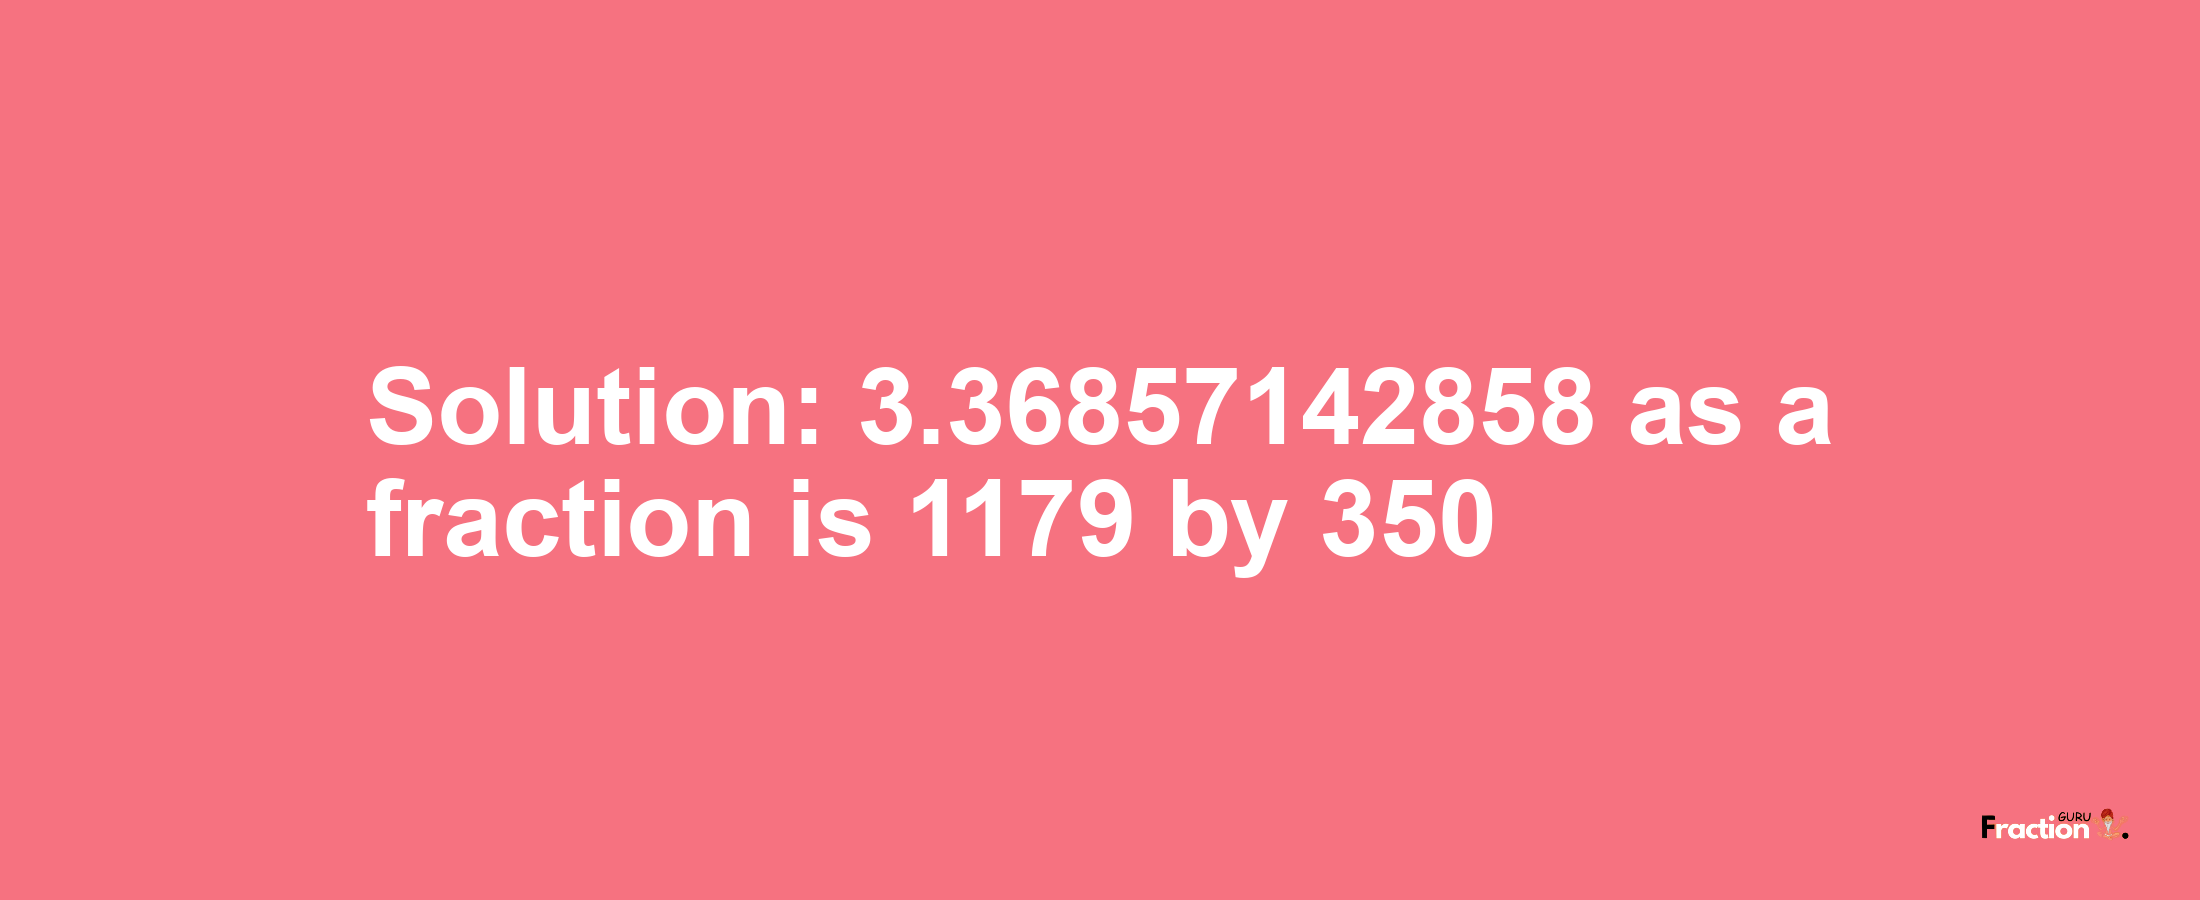 Solution:3.36857142858 as a fraction is 1179/350